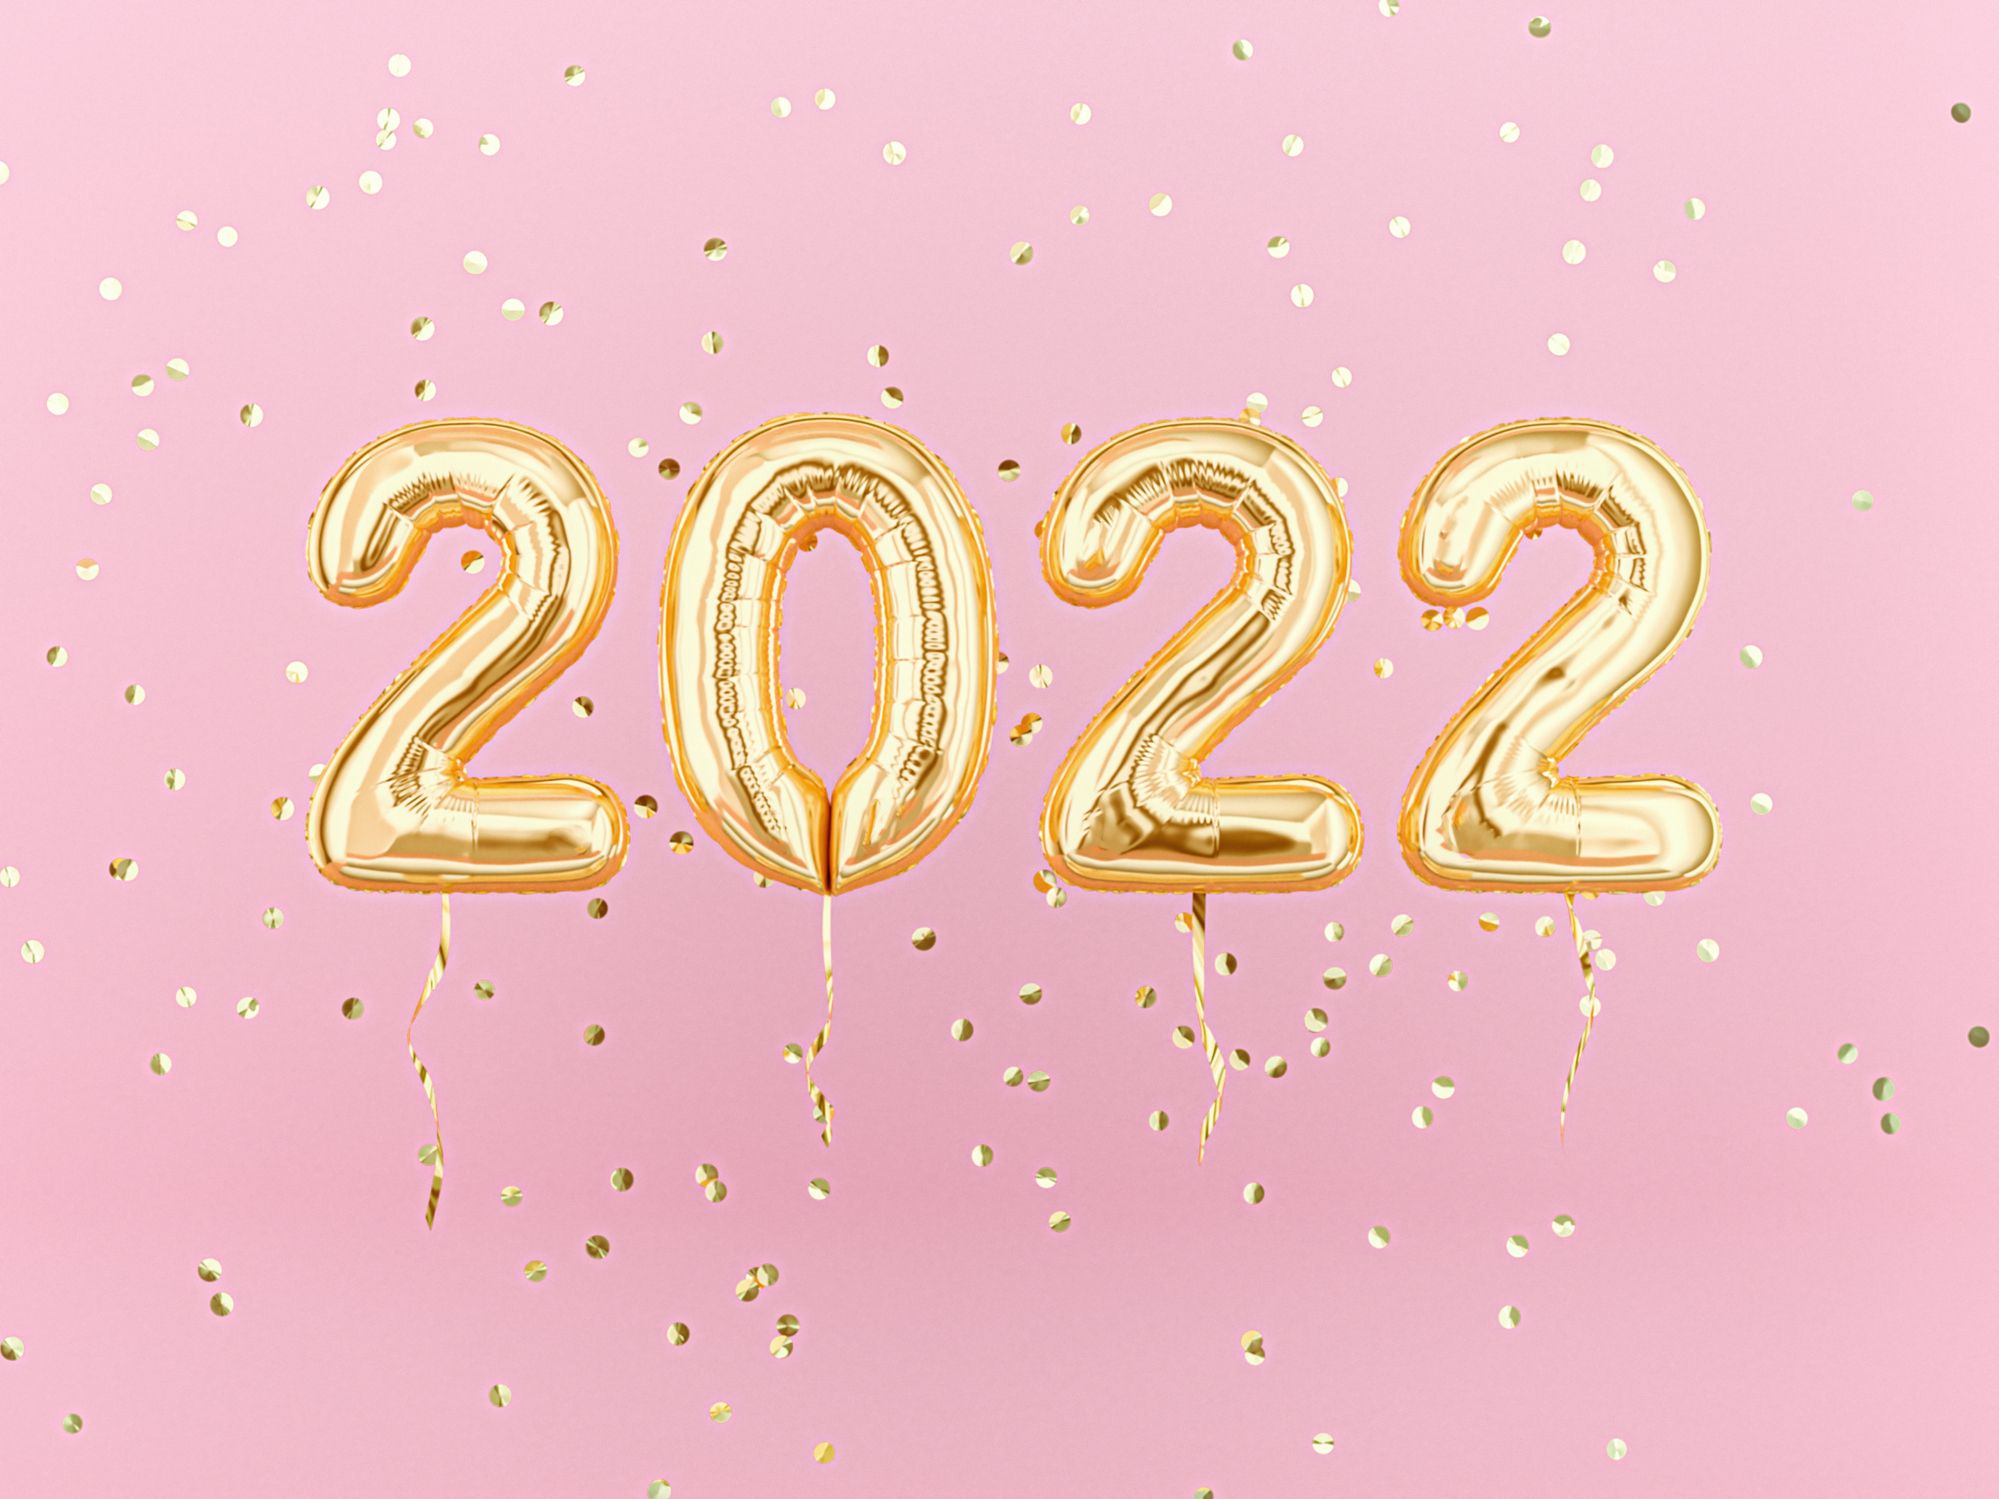 new year 2022 celebration gold foil balloons royalty free image 1639158747